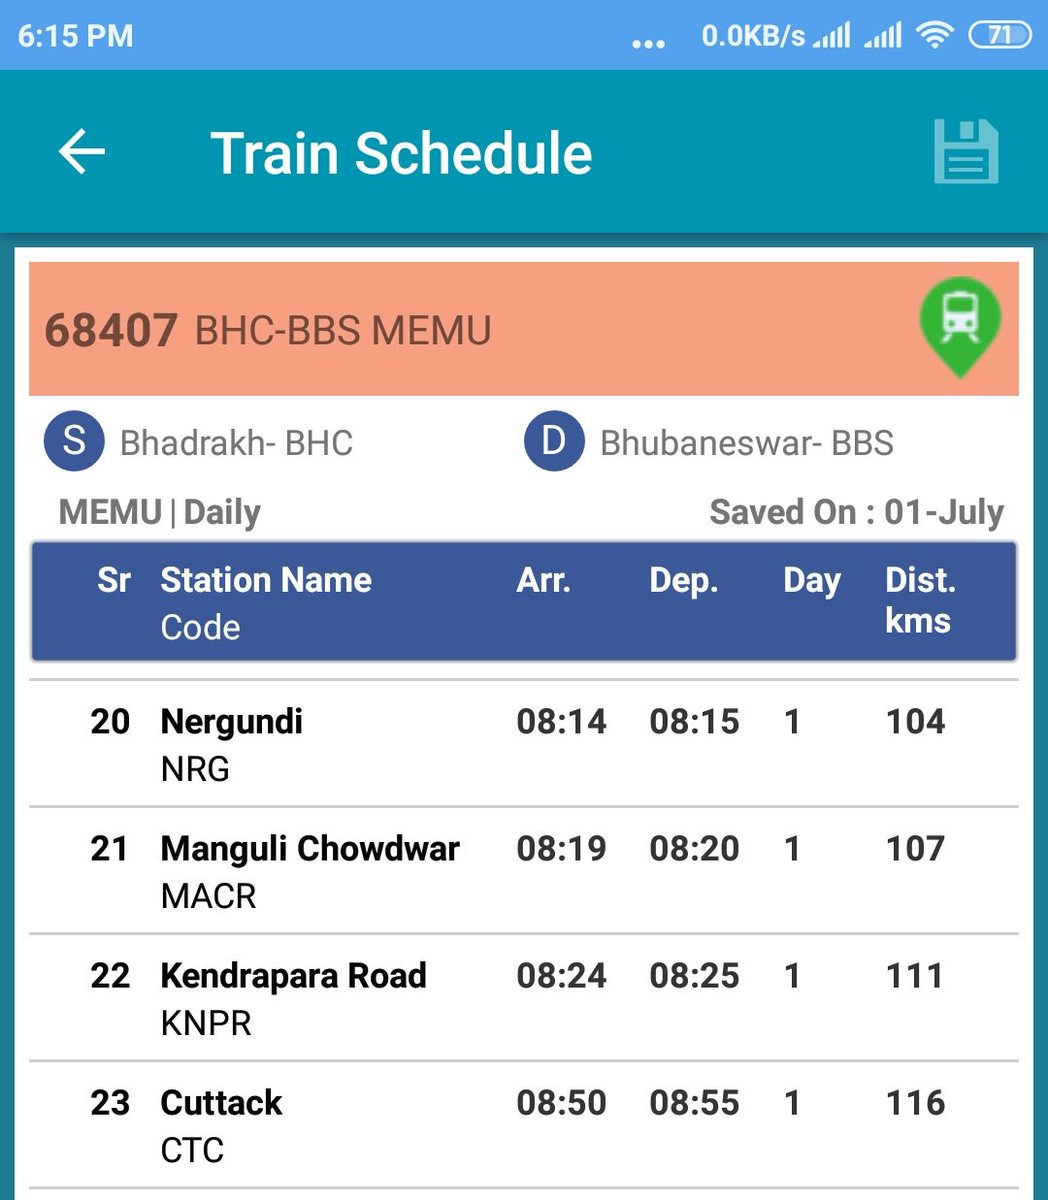 @RailwaySeva @eastcoastrail @adrmkur @DRMKhurdaroad 
Respected sir,
Kindly check two attachments that how two train detains in between KNPR AND CTC..how it is possible..and how regular passenger suffers due to this timing..🙏🙏🙏